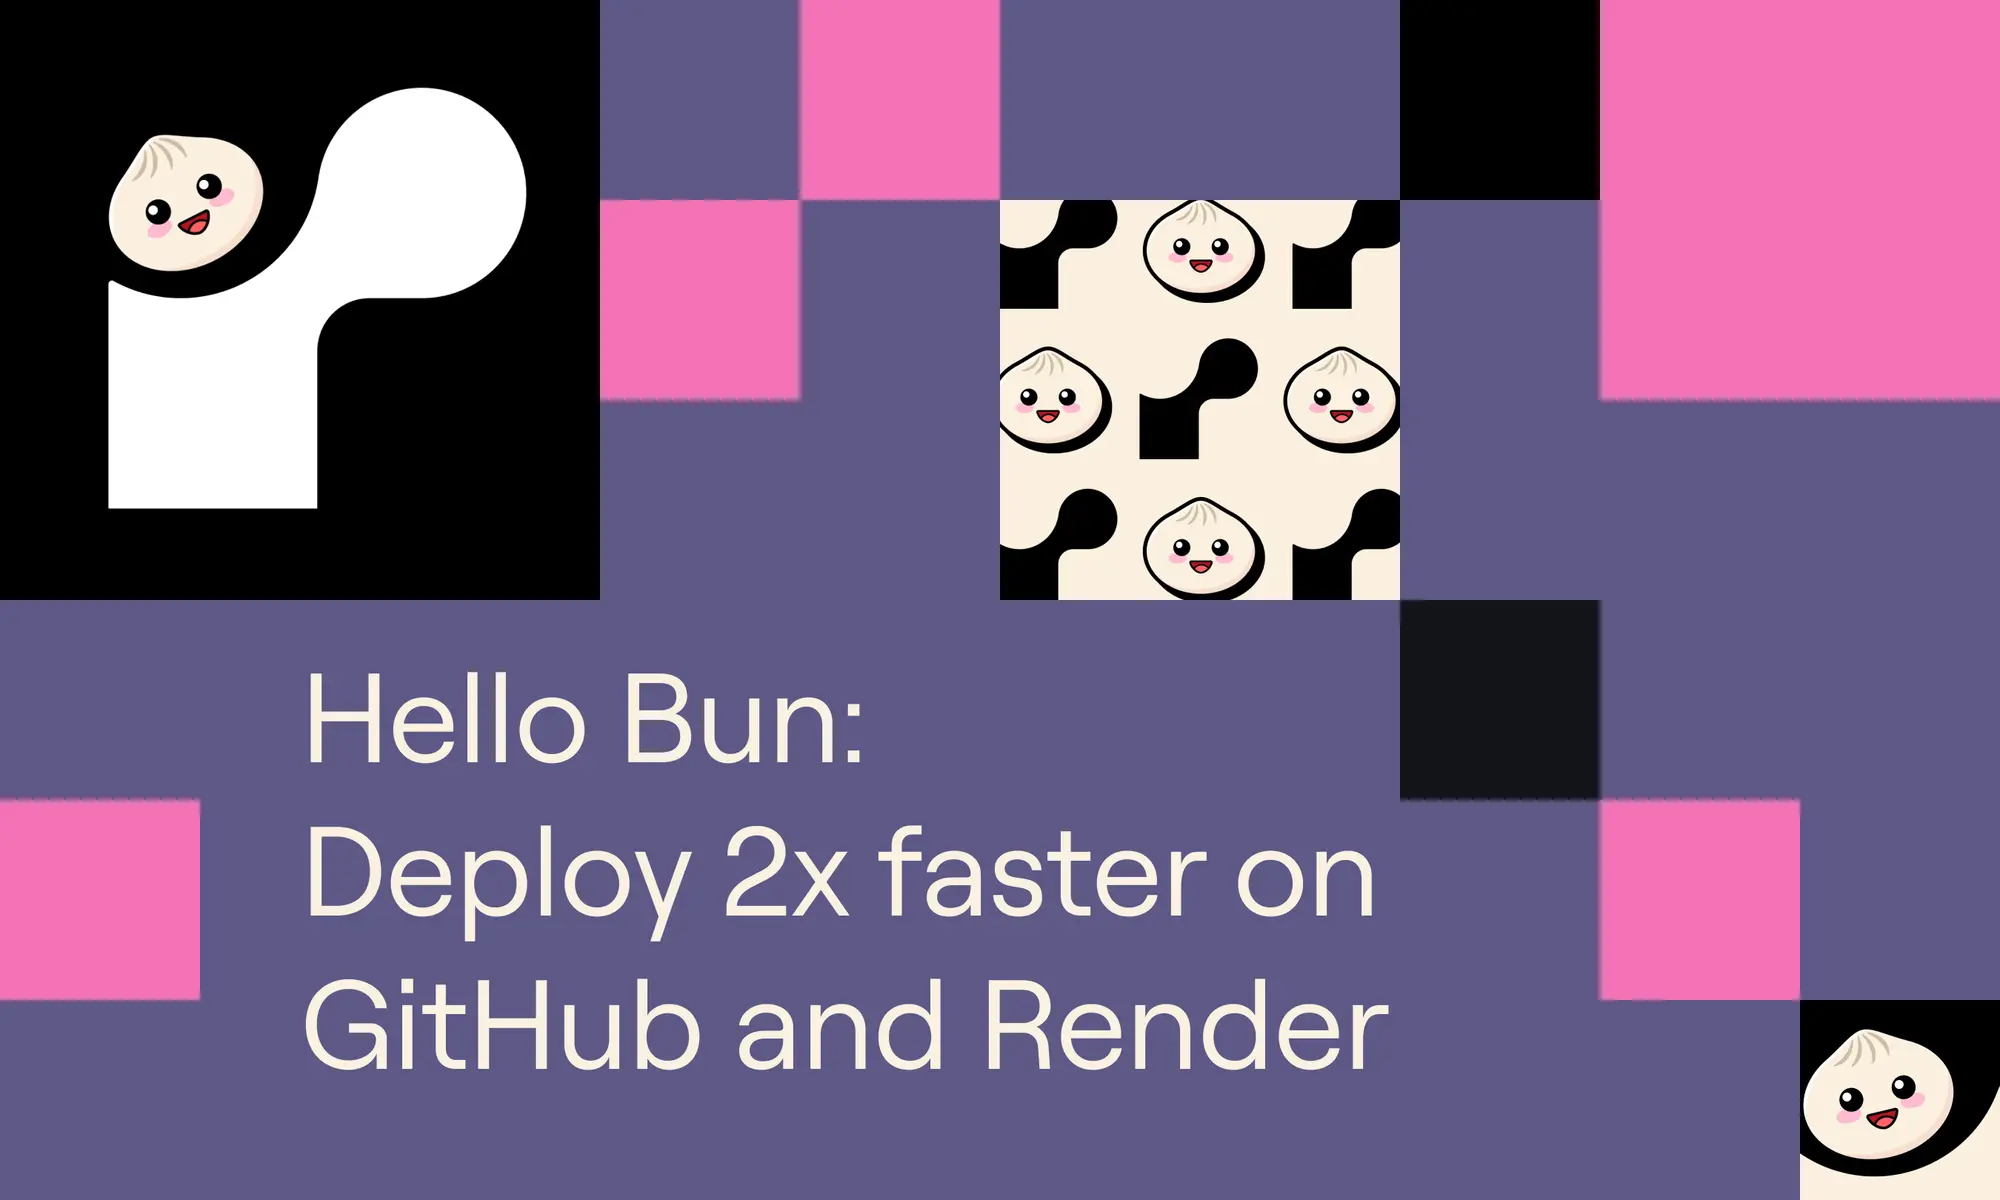 Hello Bun: How Sveld now deploys 2x faster on GitHub and Render